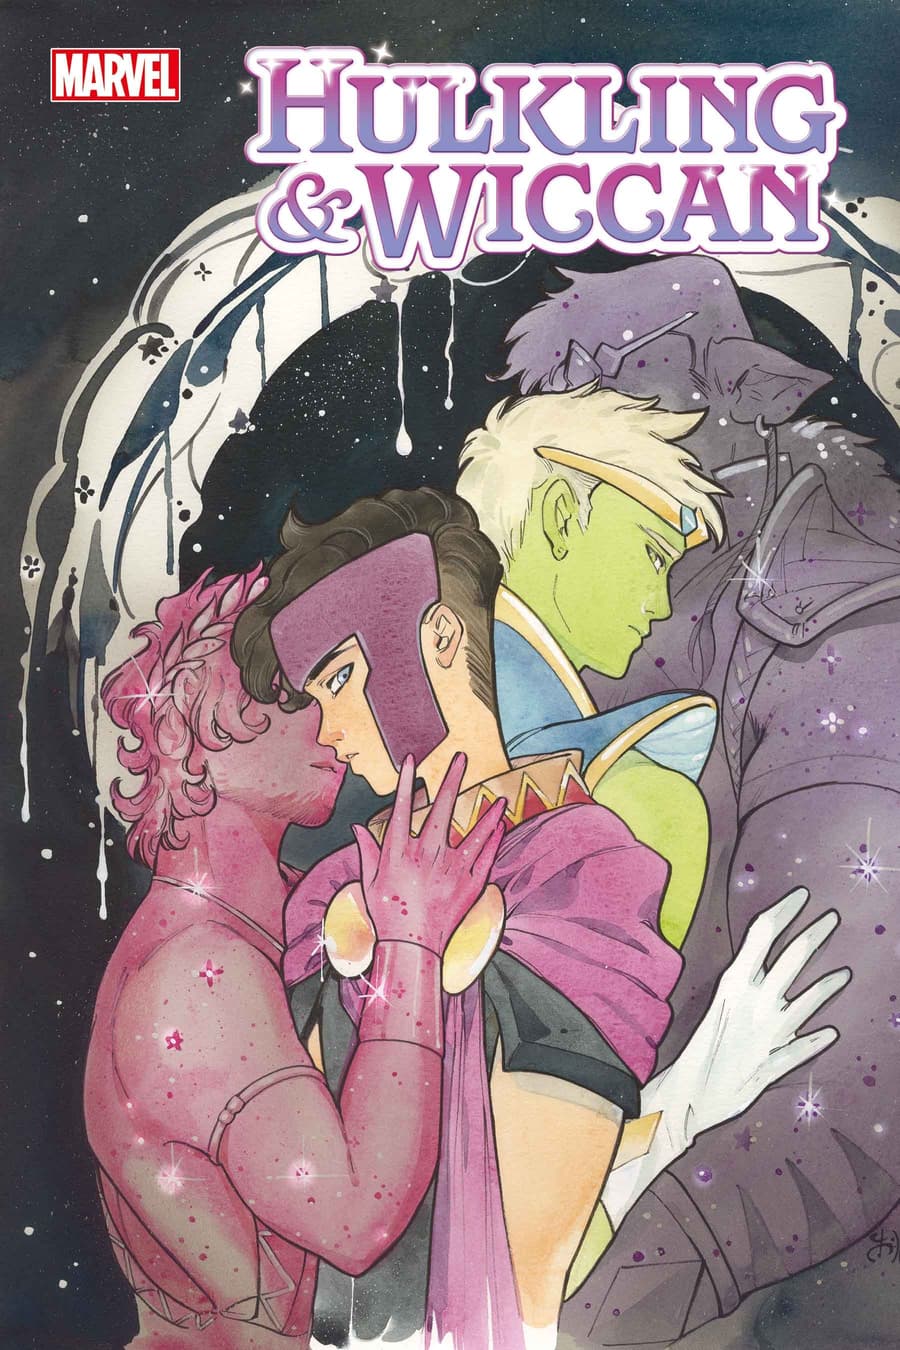 Hulkling & Wiccan #1 main cover by Peach Momoko